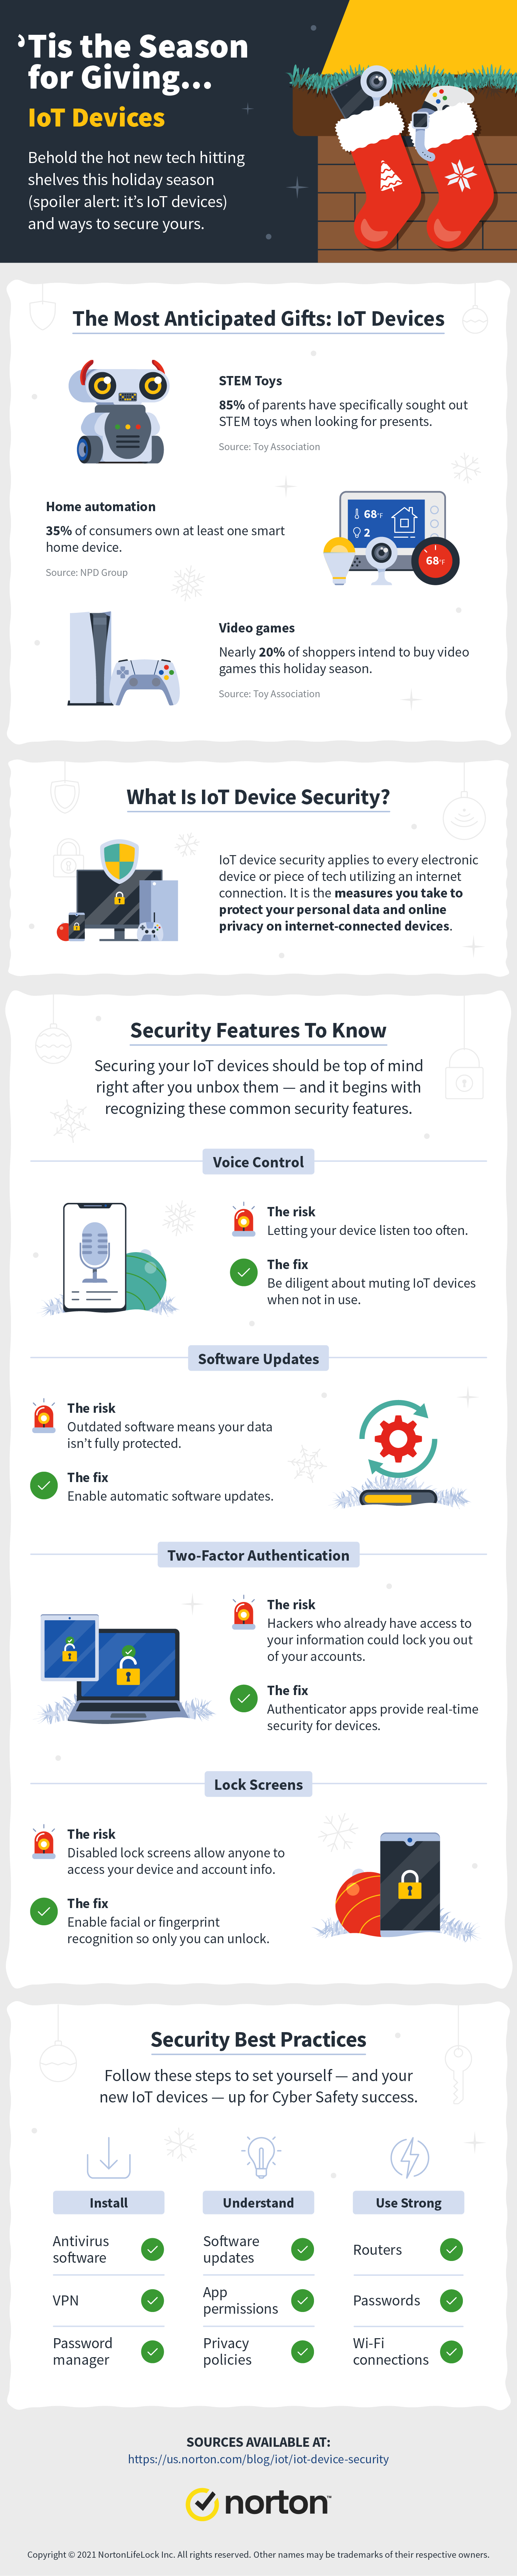 An infographic overviews the importance of IoT device security and the popularity of IoT devices during the holiday season, including the most anticipated IoT devices and IoT device security best practices to keep in mind. 